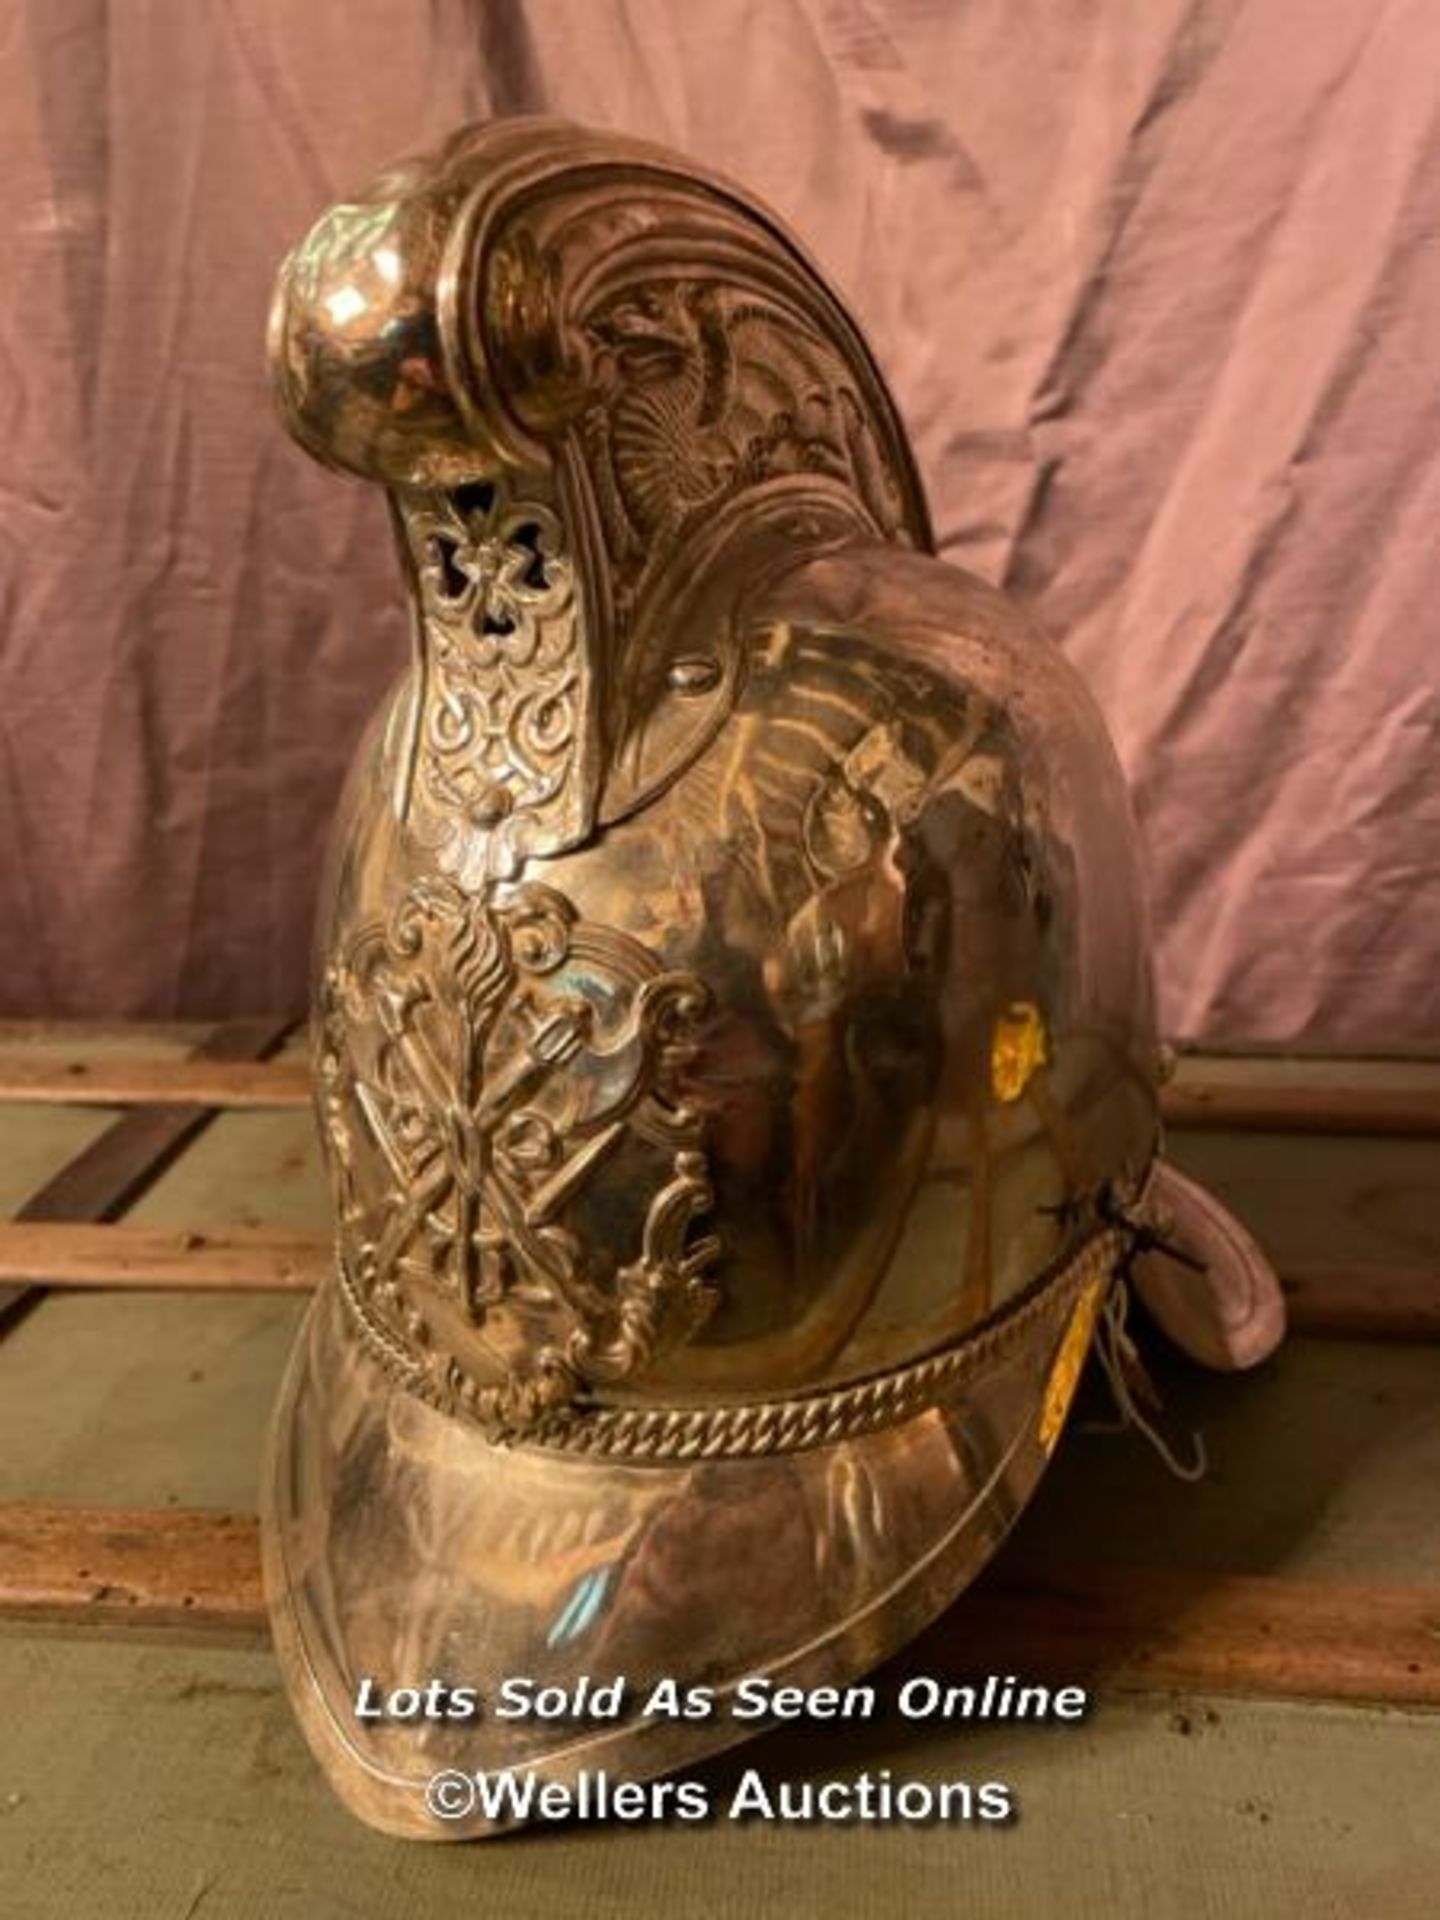 CIRCA 1930 ENGLISH SILVERED OFFICERS MERRYWEATHER HELMET - Image 4 of 4